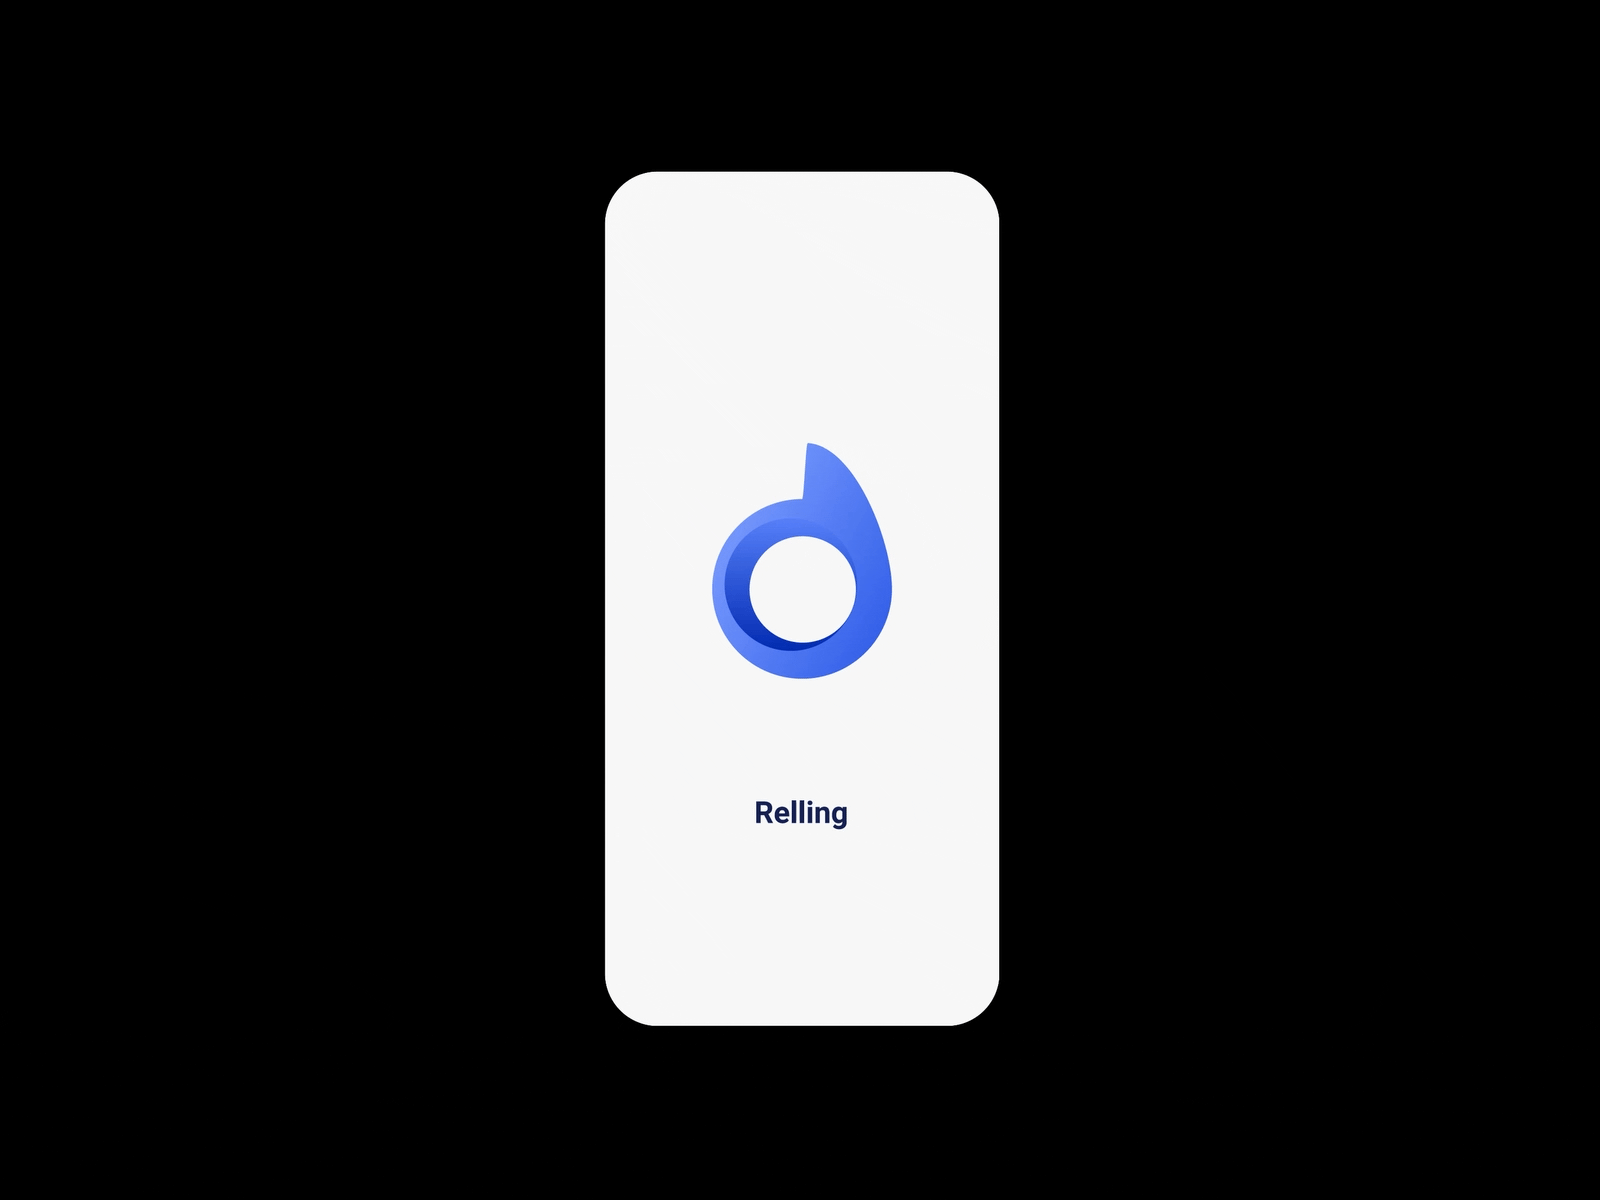 Relling Apps: UI/UX Case Study